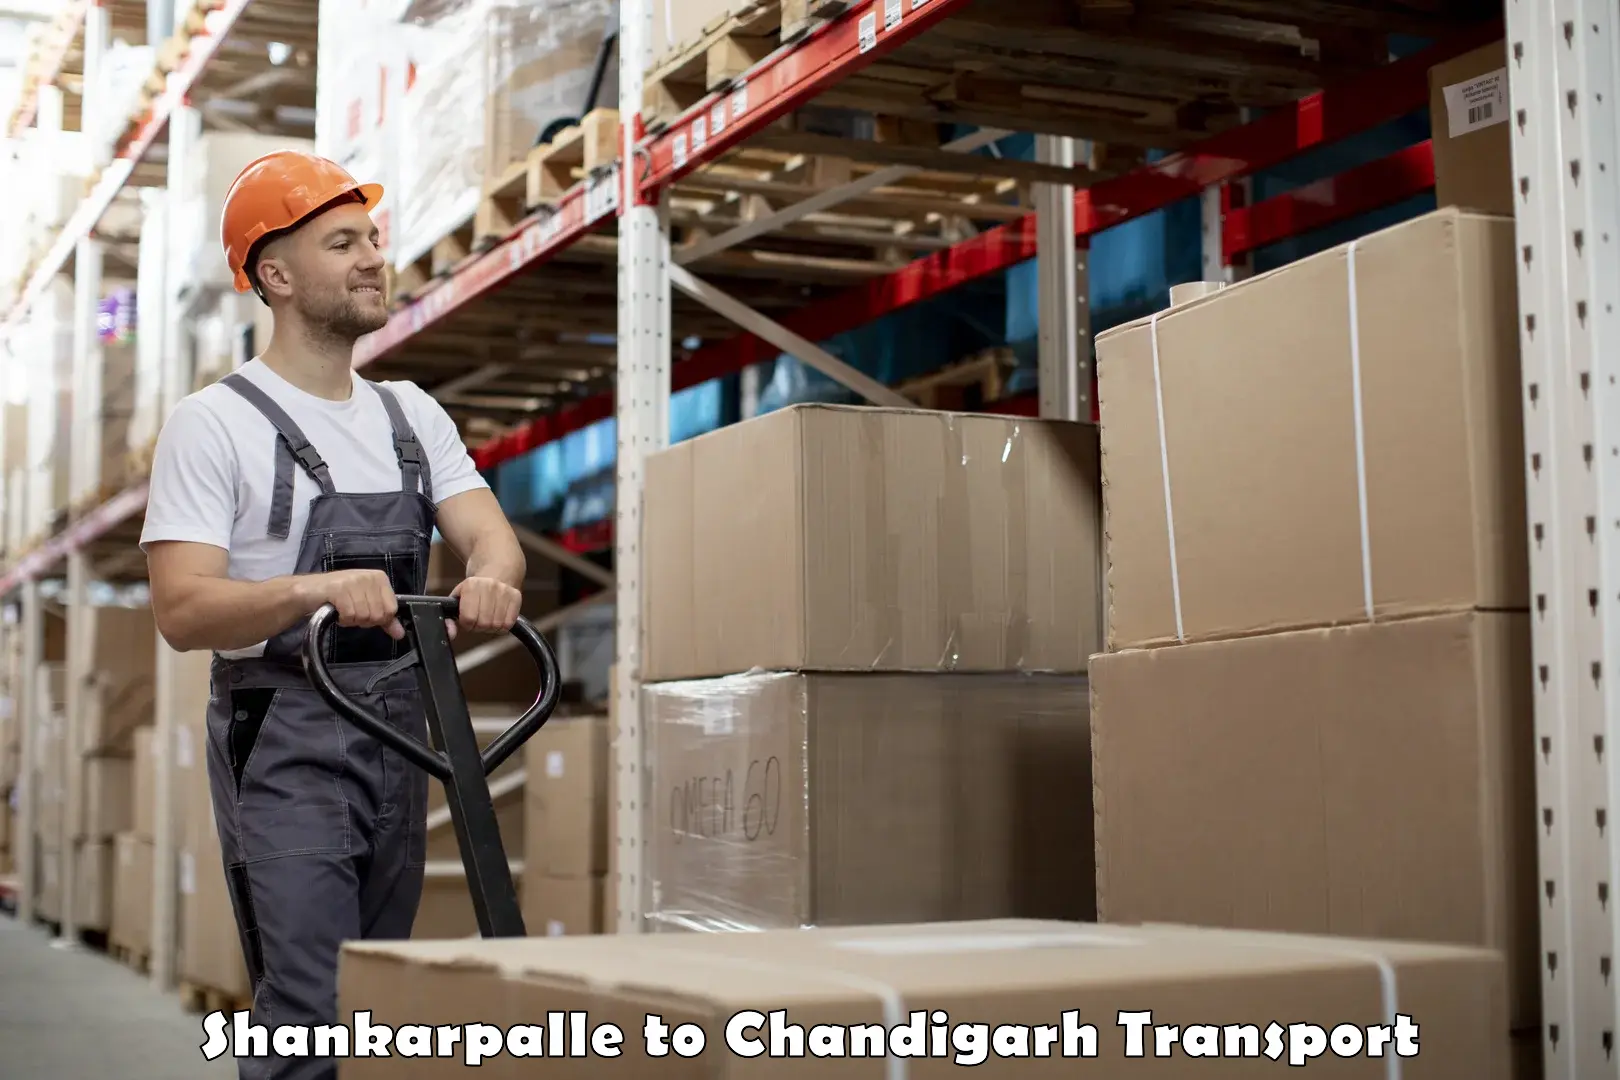 Delivery service Shankarpalle to Chandigarh